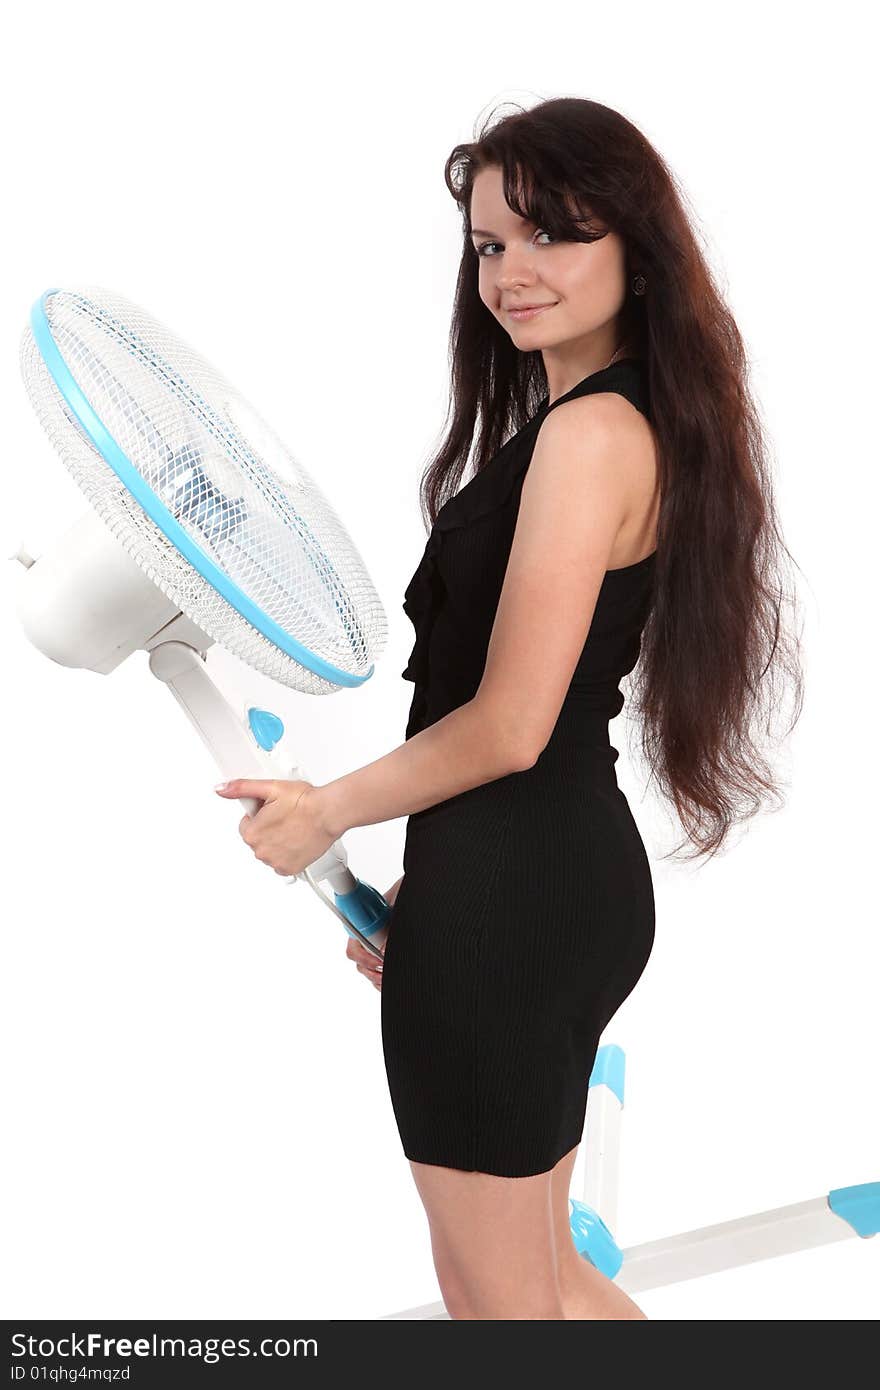 The harmonous girl and the fan. The harmonous girl and the fan